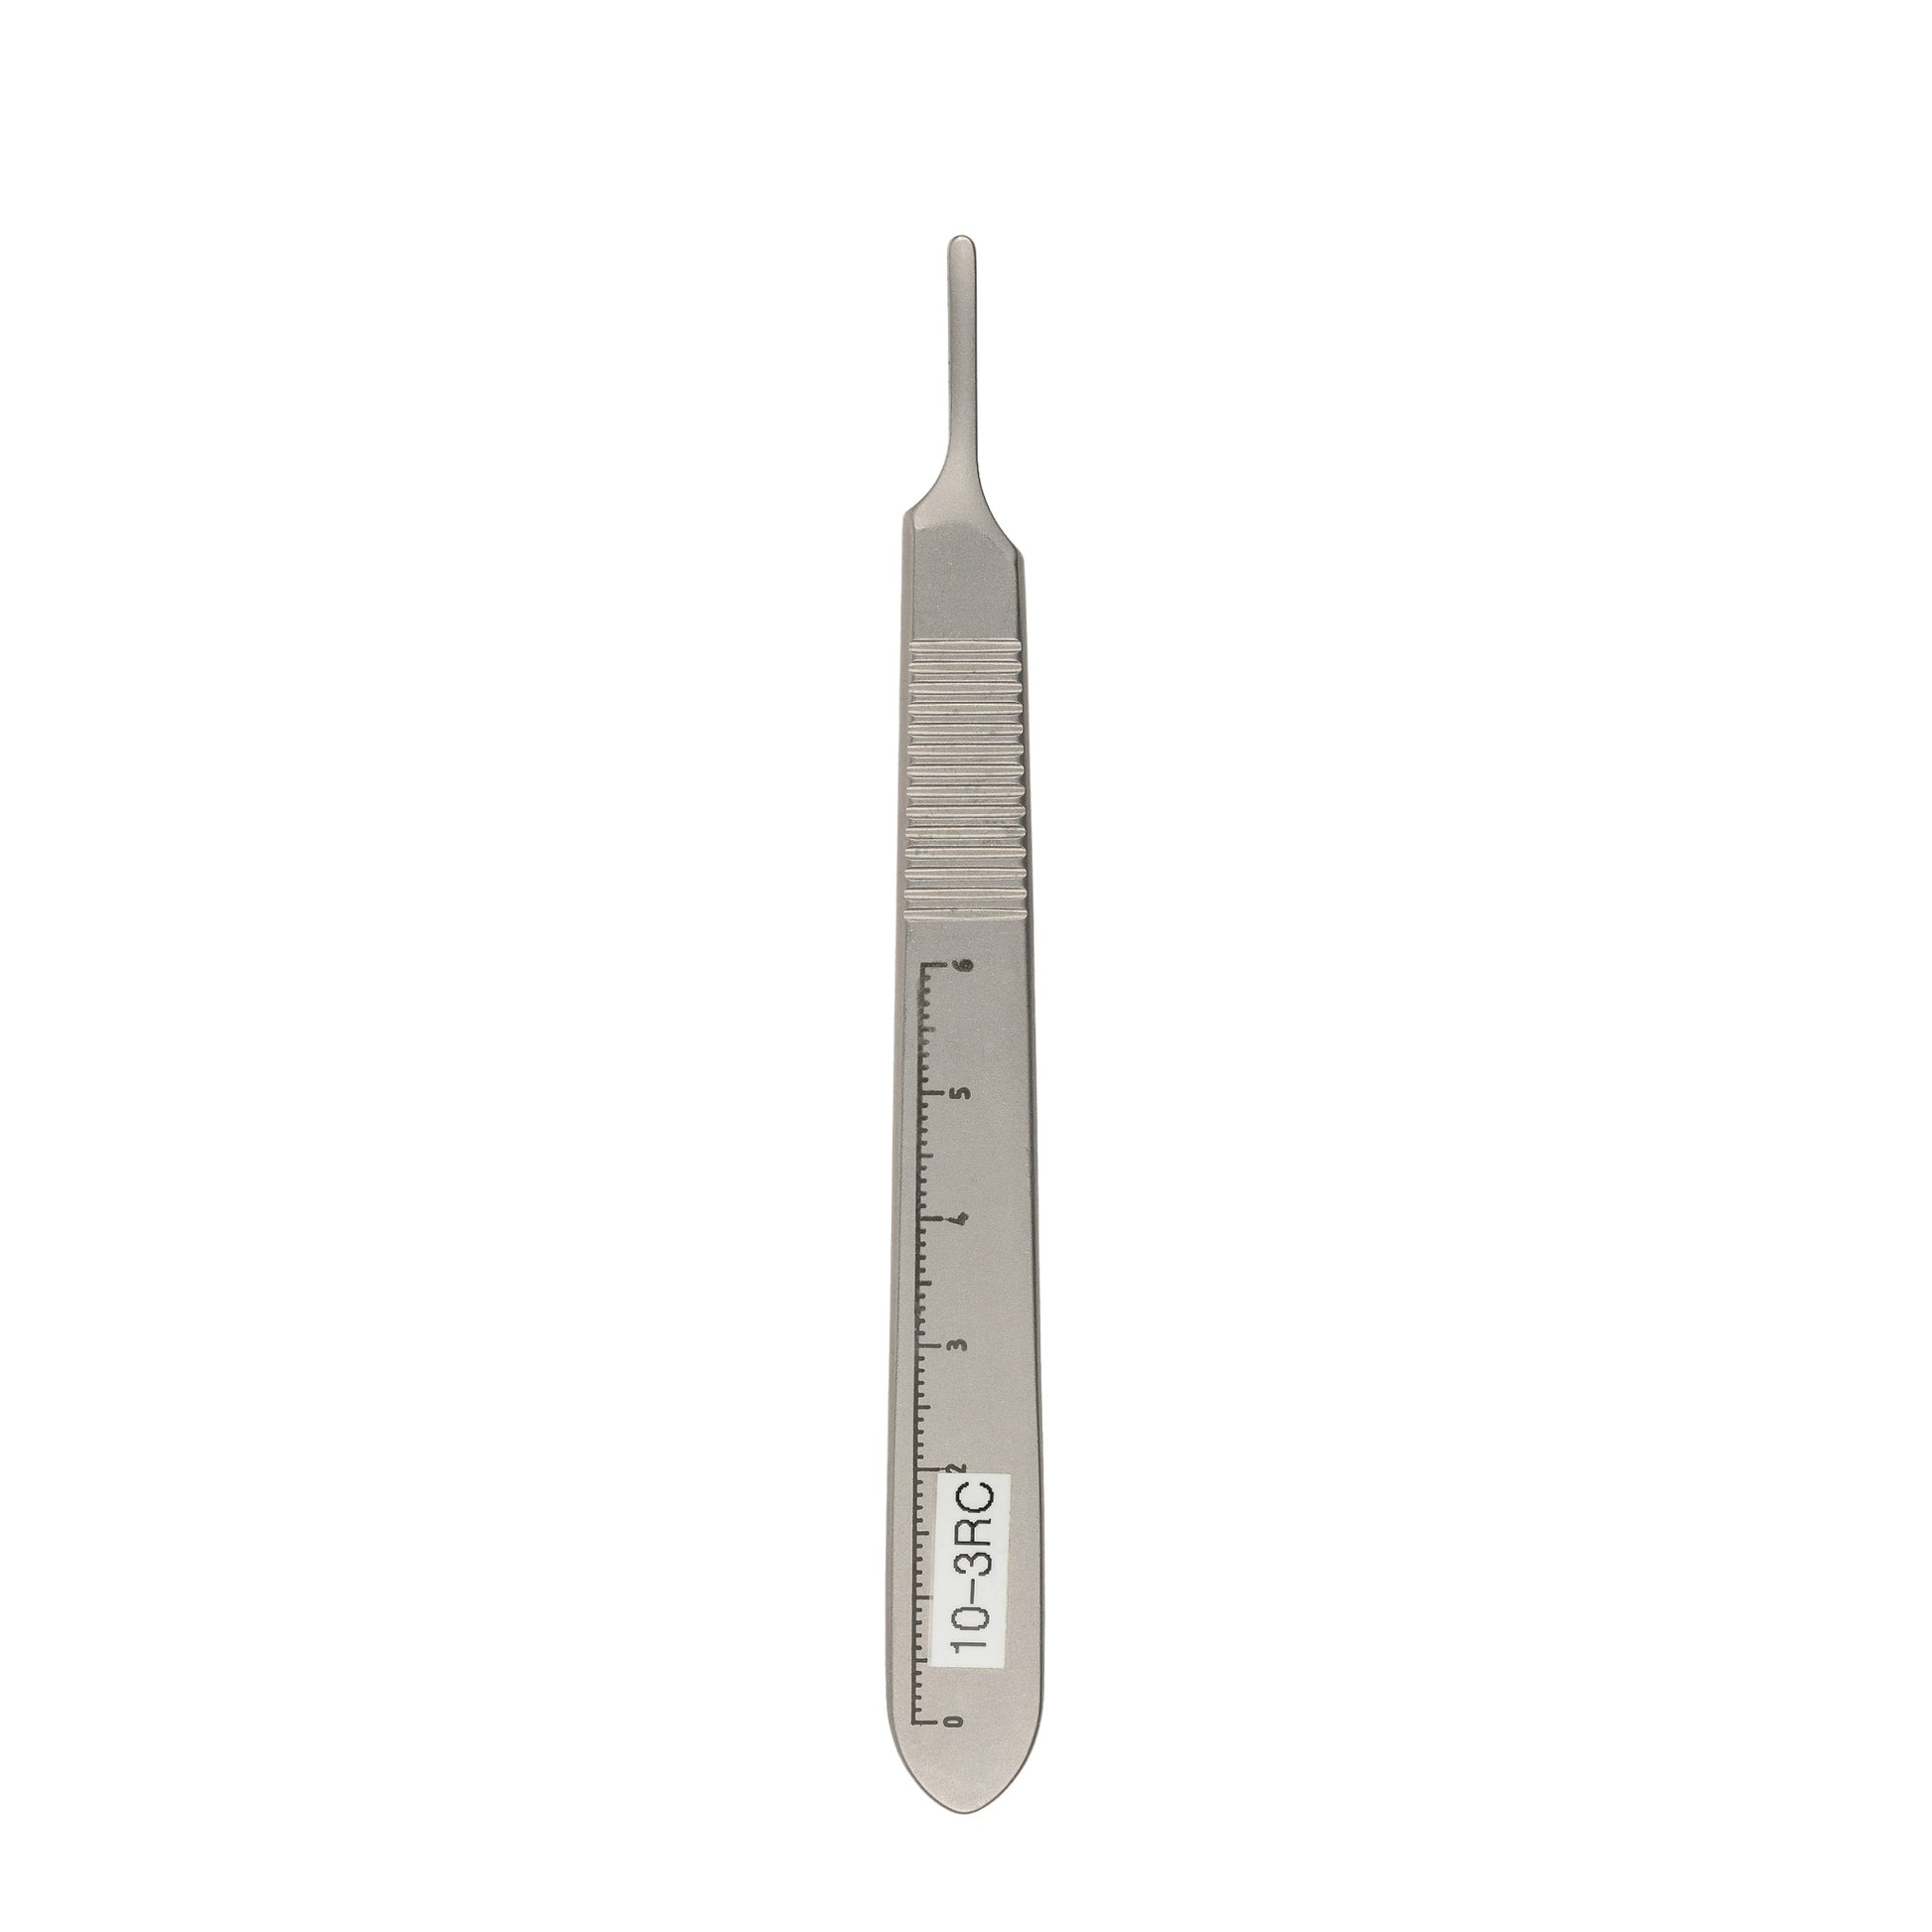 Podiatry Scalpel Handle 10-3RC With Measuring Marks